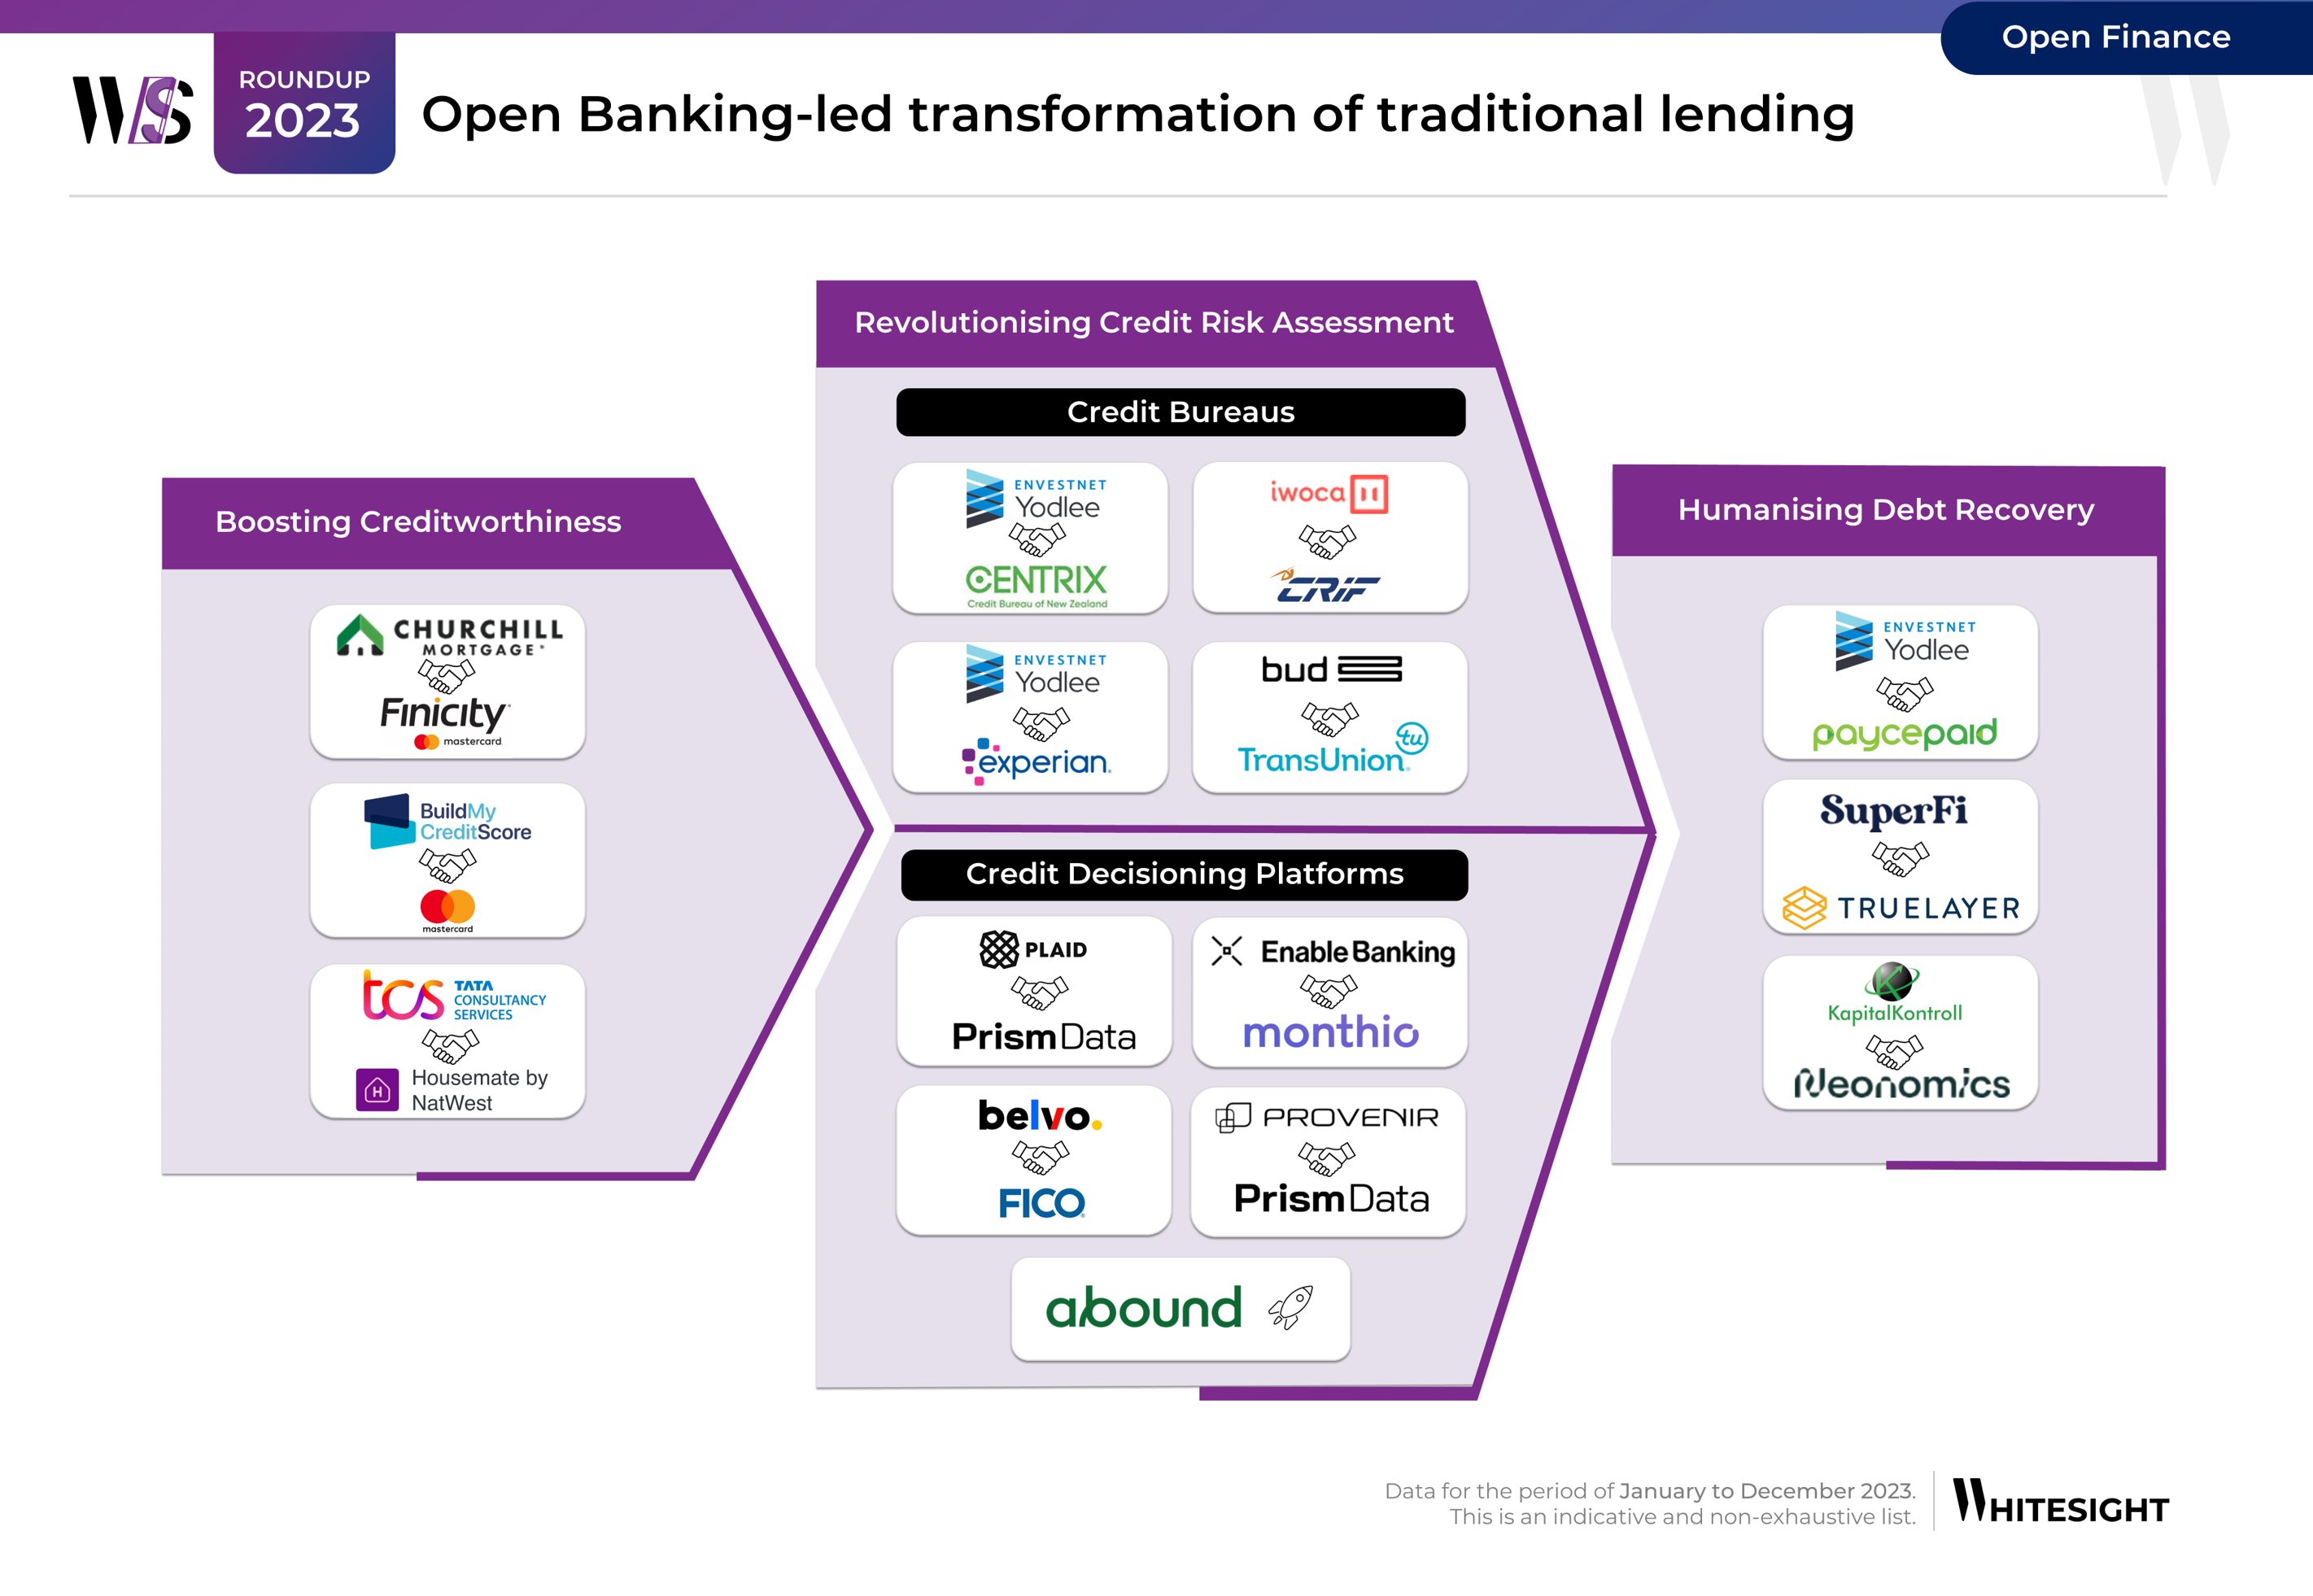 Infograhic design featuring the various financial players leveraging open banking to transform traditional lending.